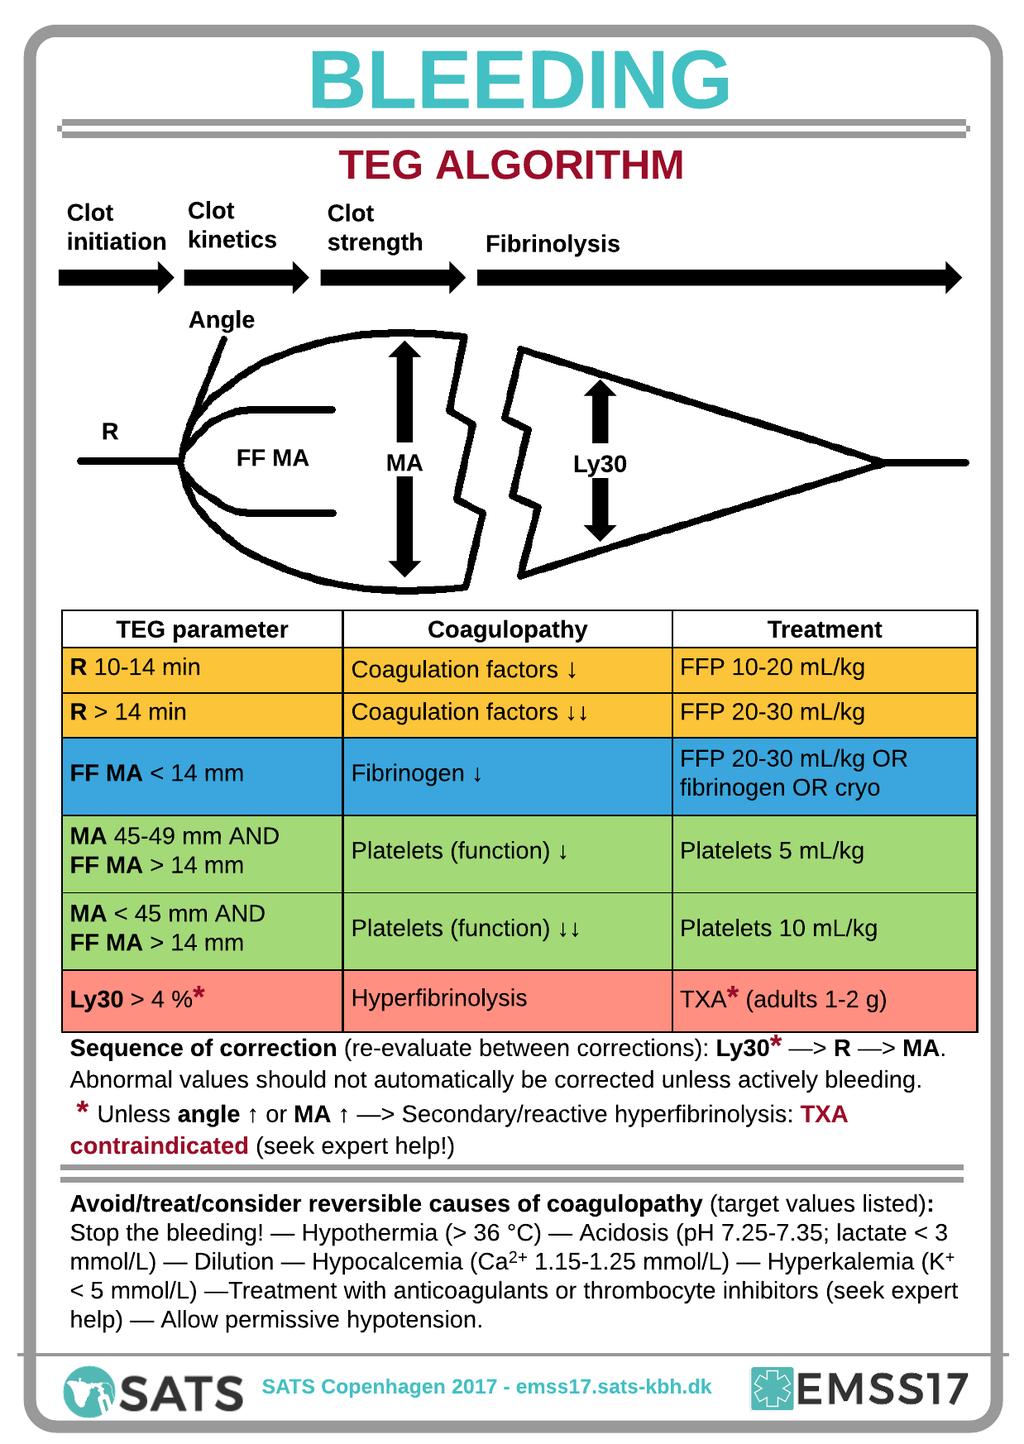 A treatment algorithm according to TEG is provided in the pocket guide (page 2 shown, downloadable at the website): When multiple TEG values are deranged, they should ideally be corrected in the